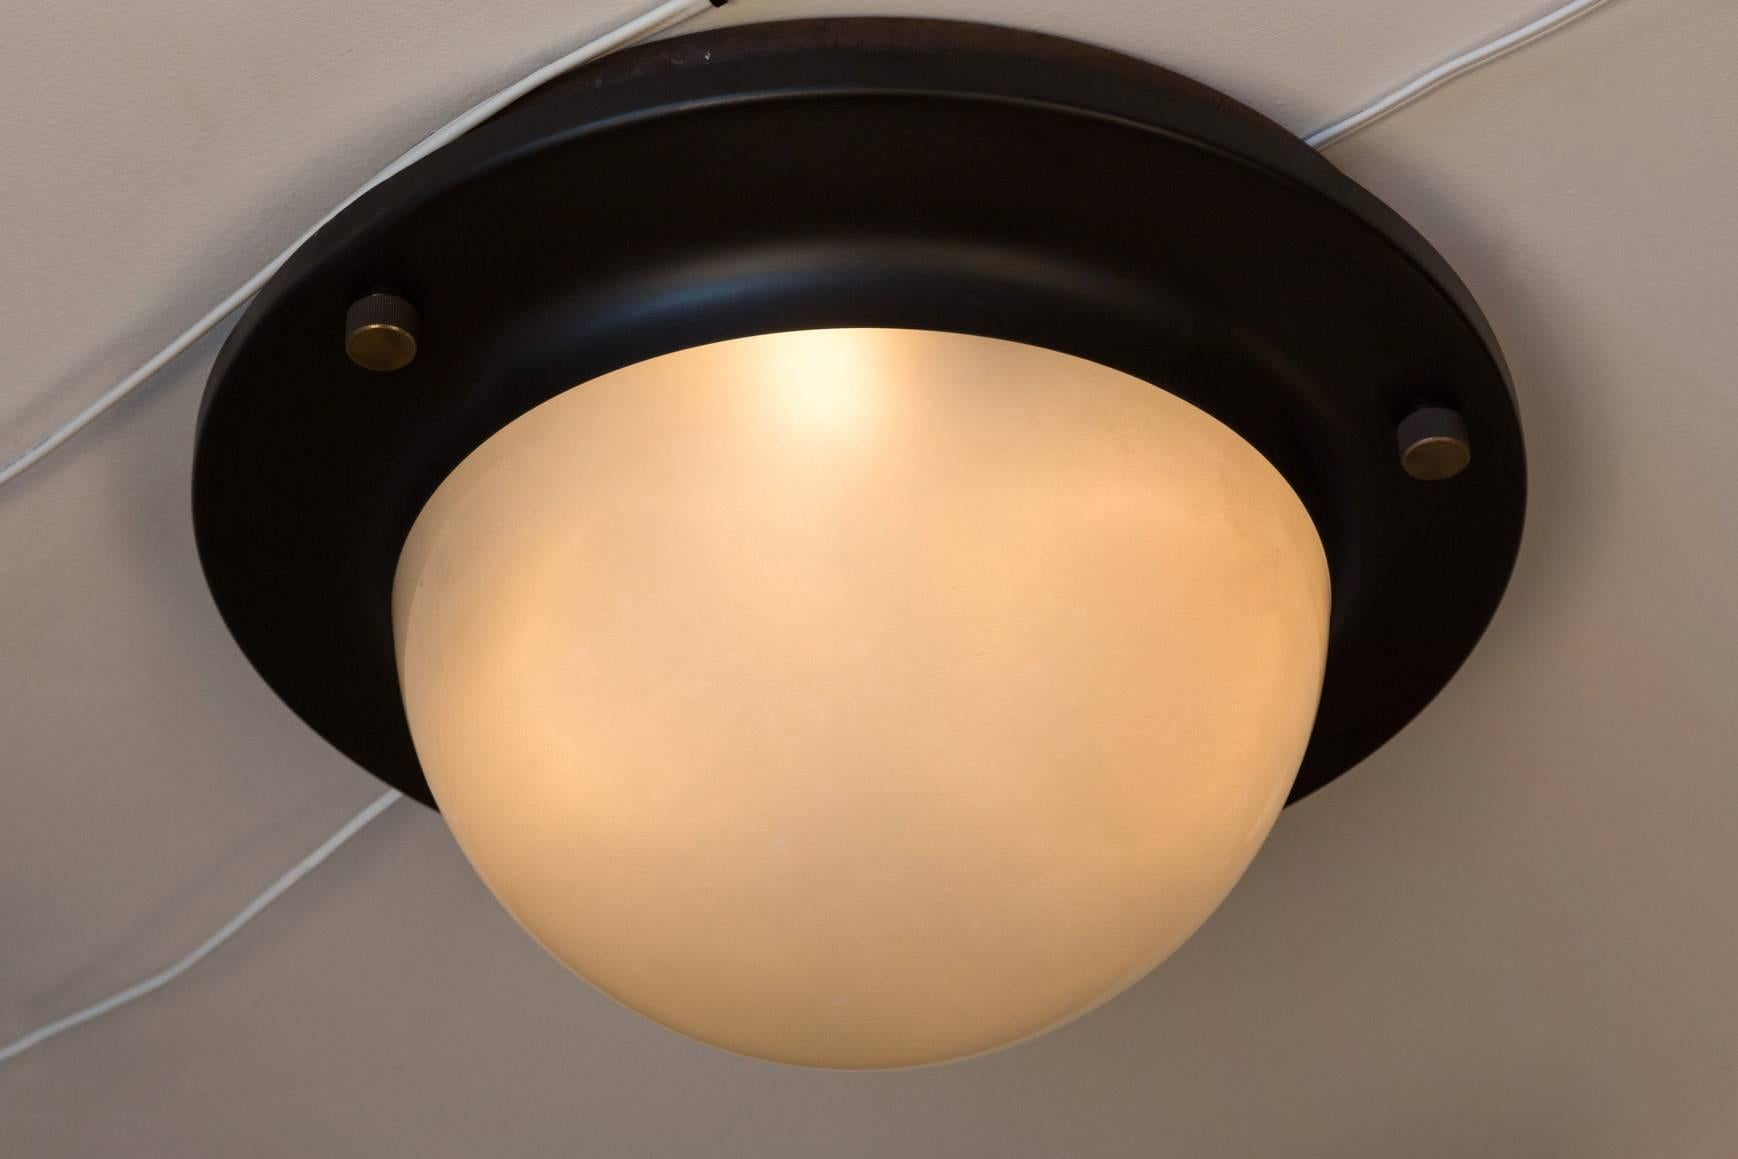 1960s Luigi Caccia Dominioni large 'Tommy' Ceiling Light for Azucena. An large-scale and iconic design executed in black painted metal, brass hardware and opaline glass, Italy, circa 1965.

Azucena was one of the most innovative lighting design